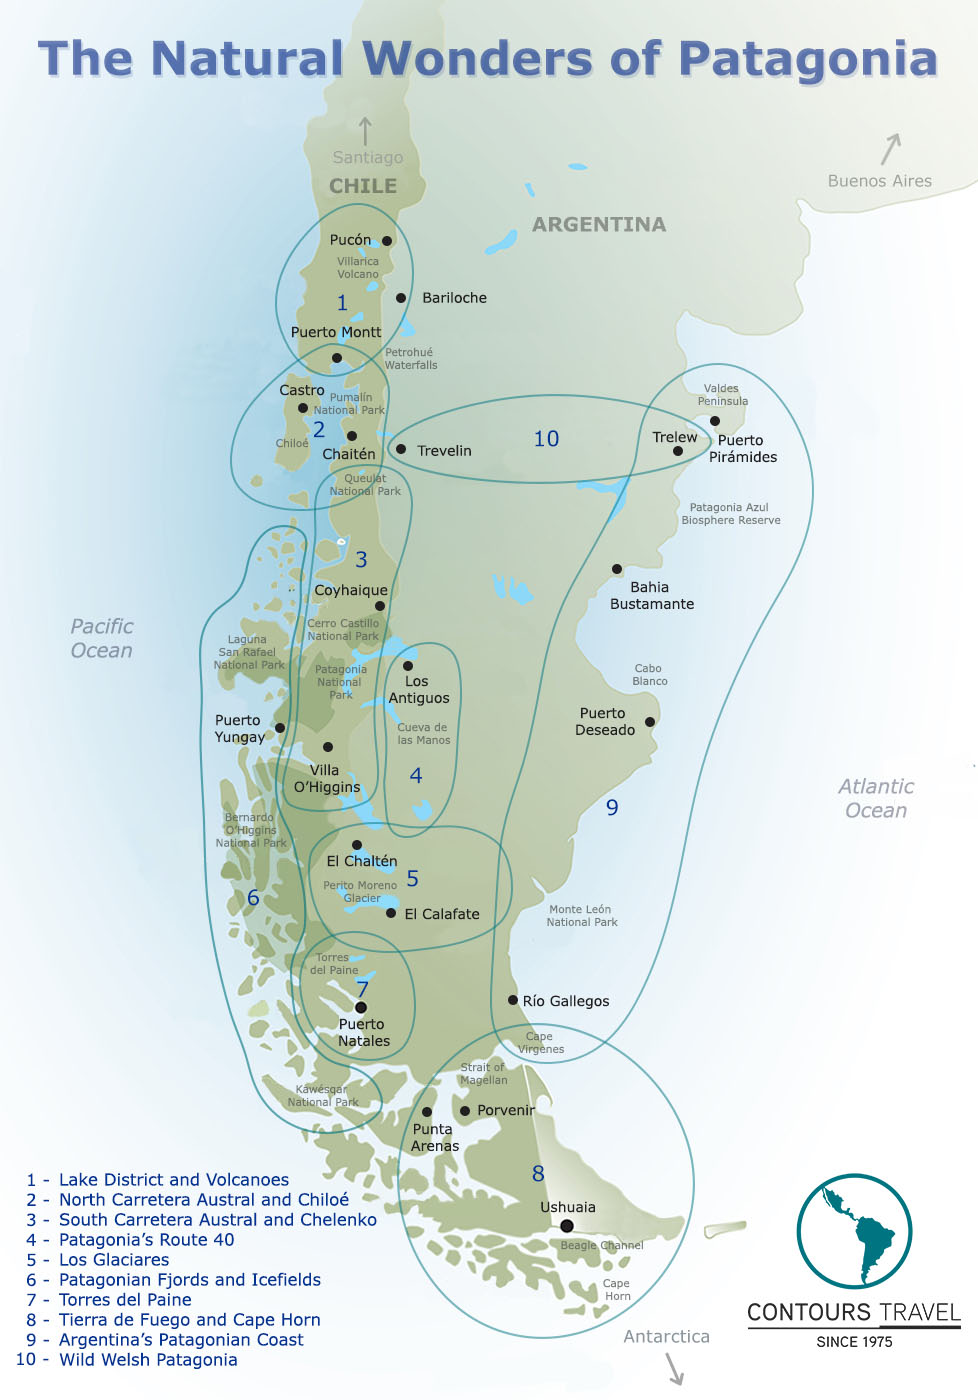 Map of Patagonia by regions Contours Travel